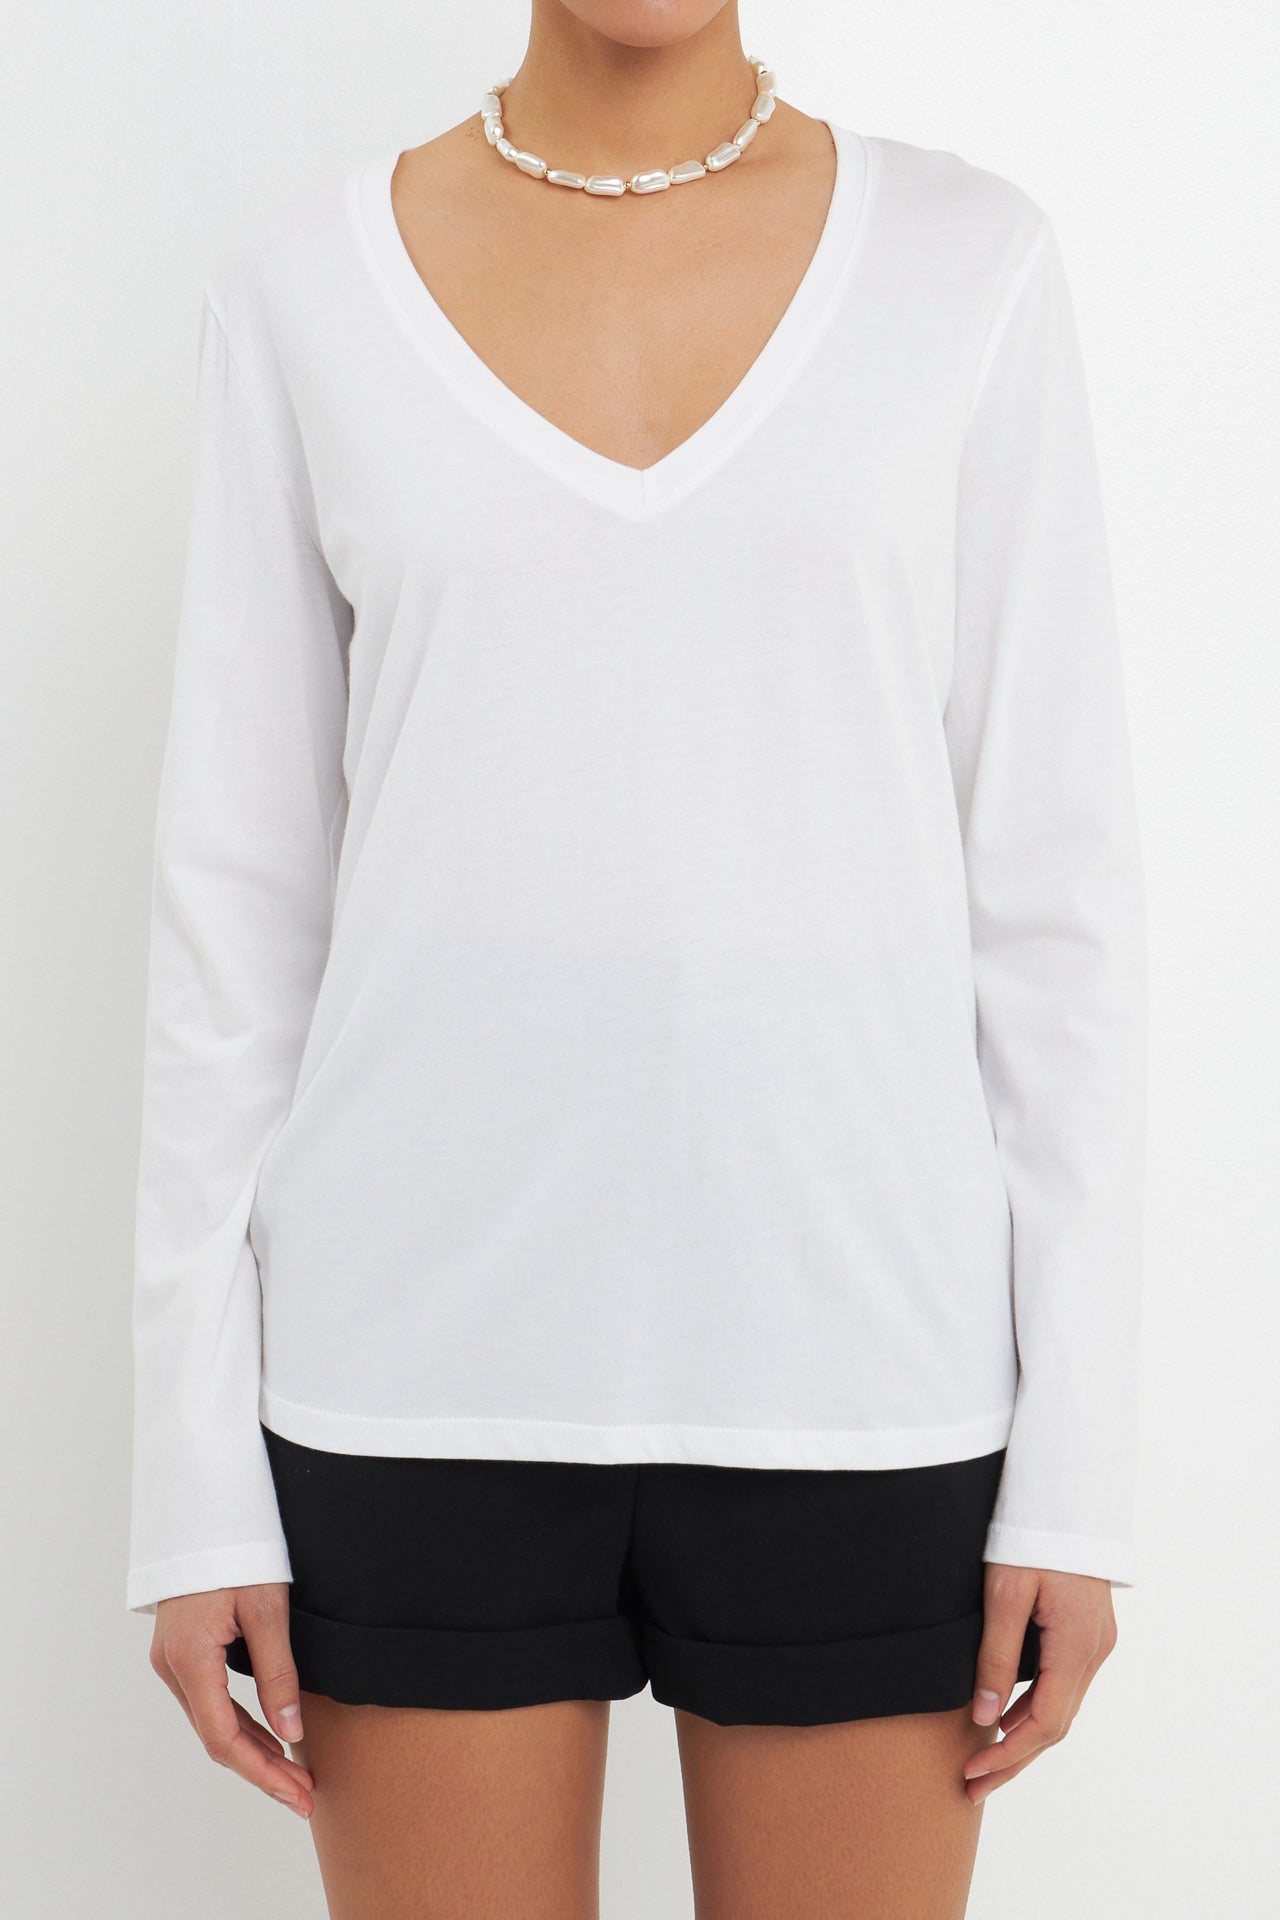 GREY LAB - Classic Long Sleeve V Neck Tee - TOPS available at Objectrare